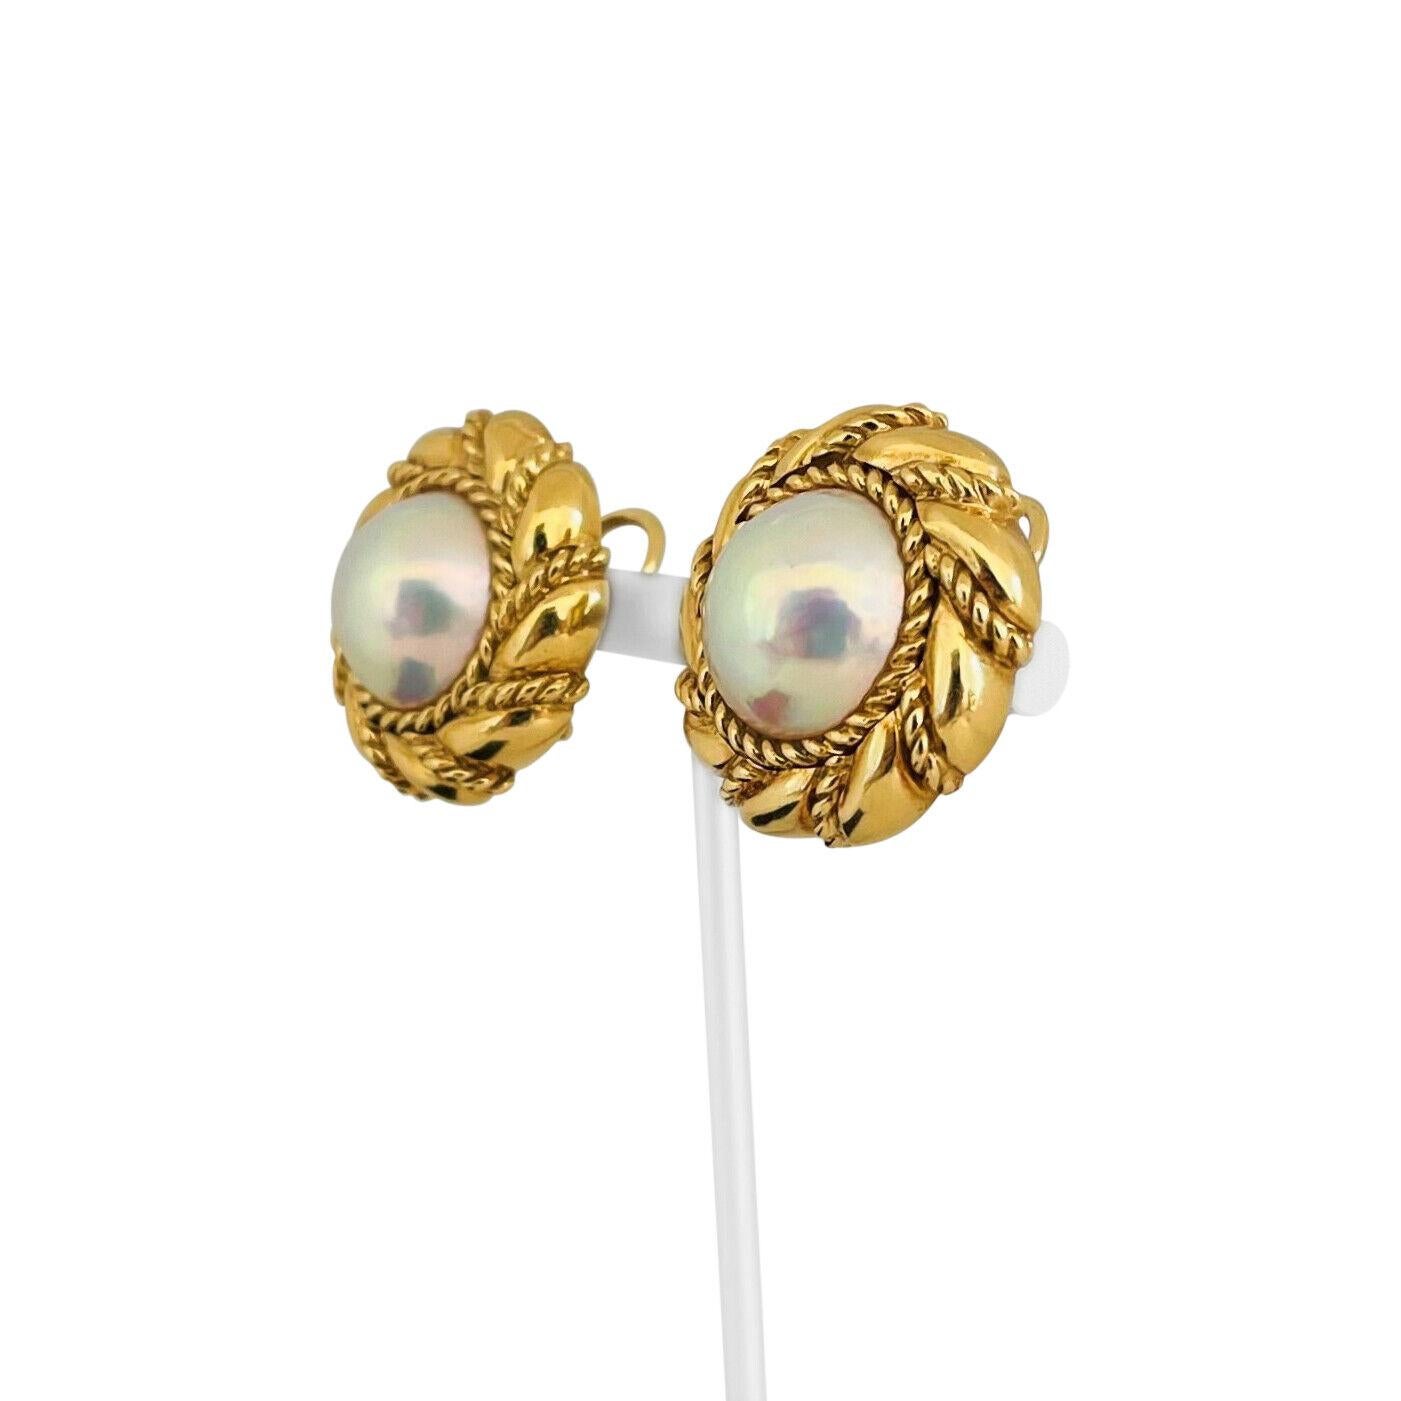 Mikimoto 18k Yellow Gold and 15mm Mabe Pearls Earclips

Condition:  Excellent Condition
Metal:  18k Gold (Marked, and Professionally Tested)
Weight:  28.3g Total Both Earrings
Pearls:  15mm Mabe Pearls
Pearls Description:  Whitish with strong rose